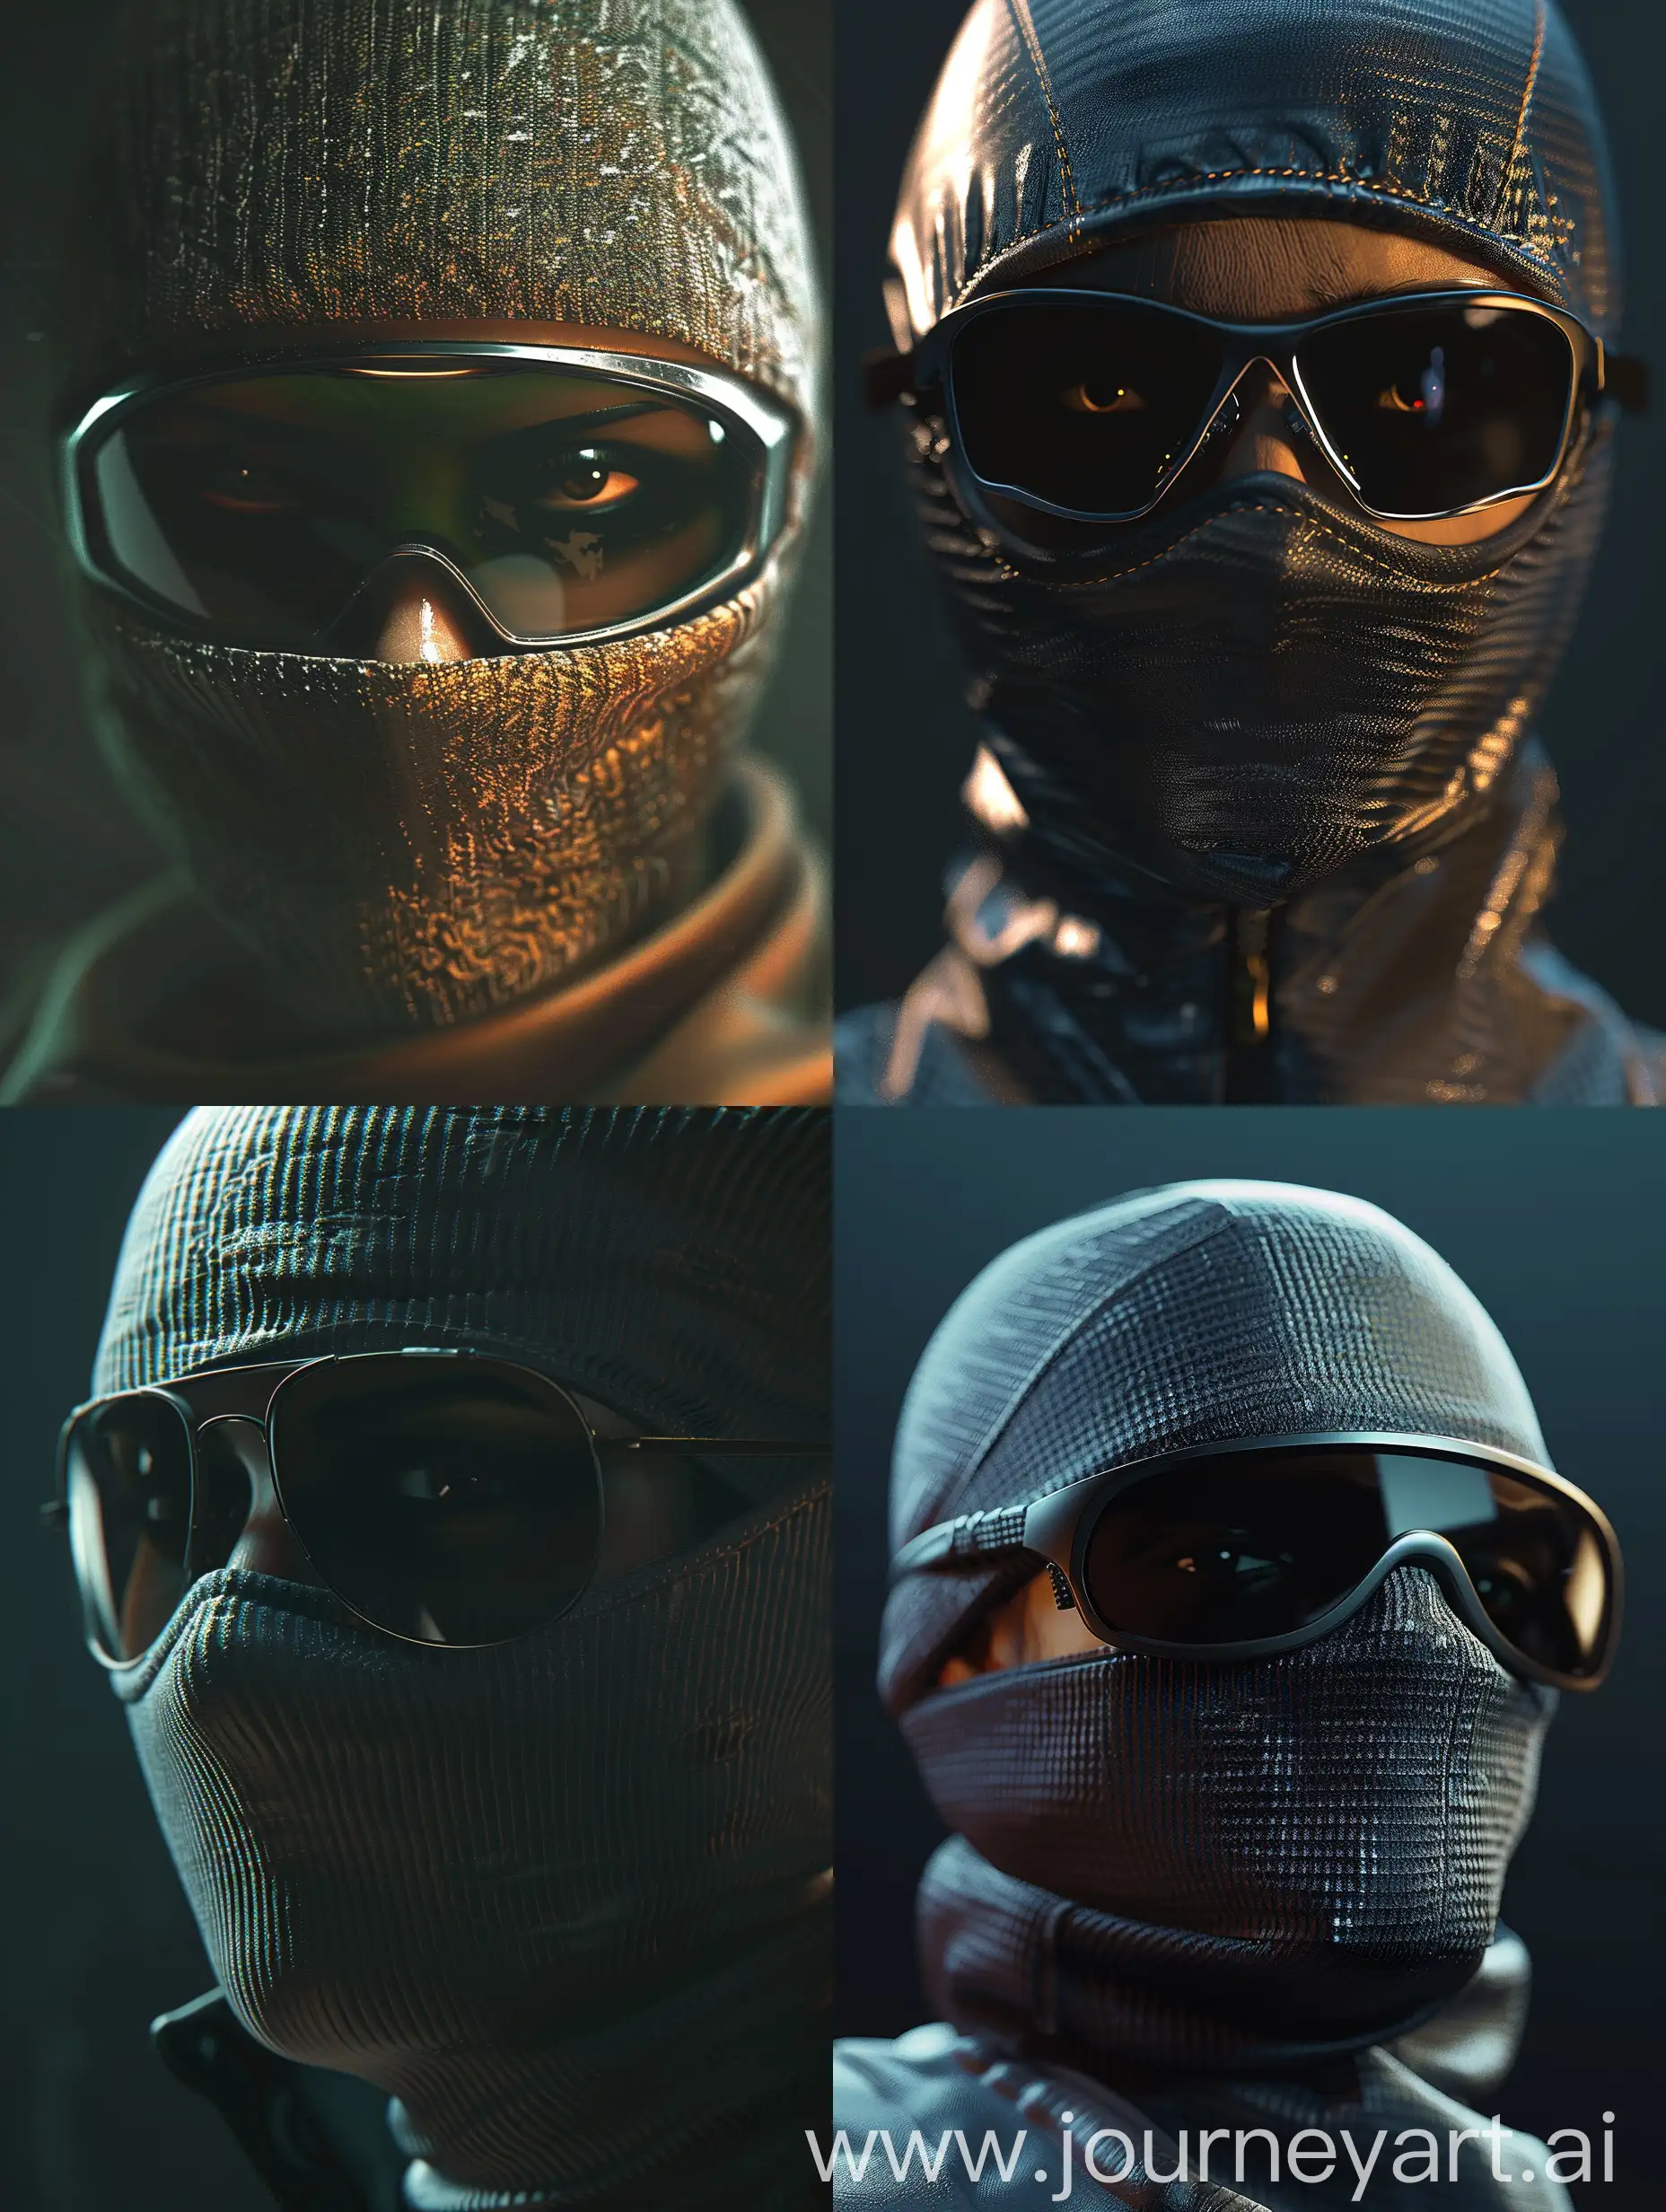 A striking, hyper-realistic 3D close-up of a person wearing sunglasses and a stylish balaclava. The sunglasses are sleek and moder

n, while the balaclava is fashionably designed, with the wearer's eyes peeking through a small opening. The background is a deep, dark void, focusing the viewer's attention entirely on the figure. The lighting highlights the contours of the face and the reflections on the sunglasses, creating an intense and mysterious atmosphere.